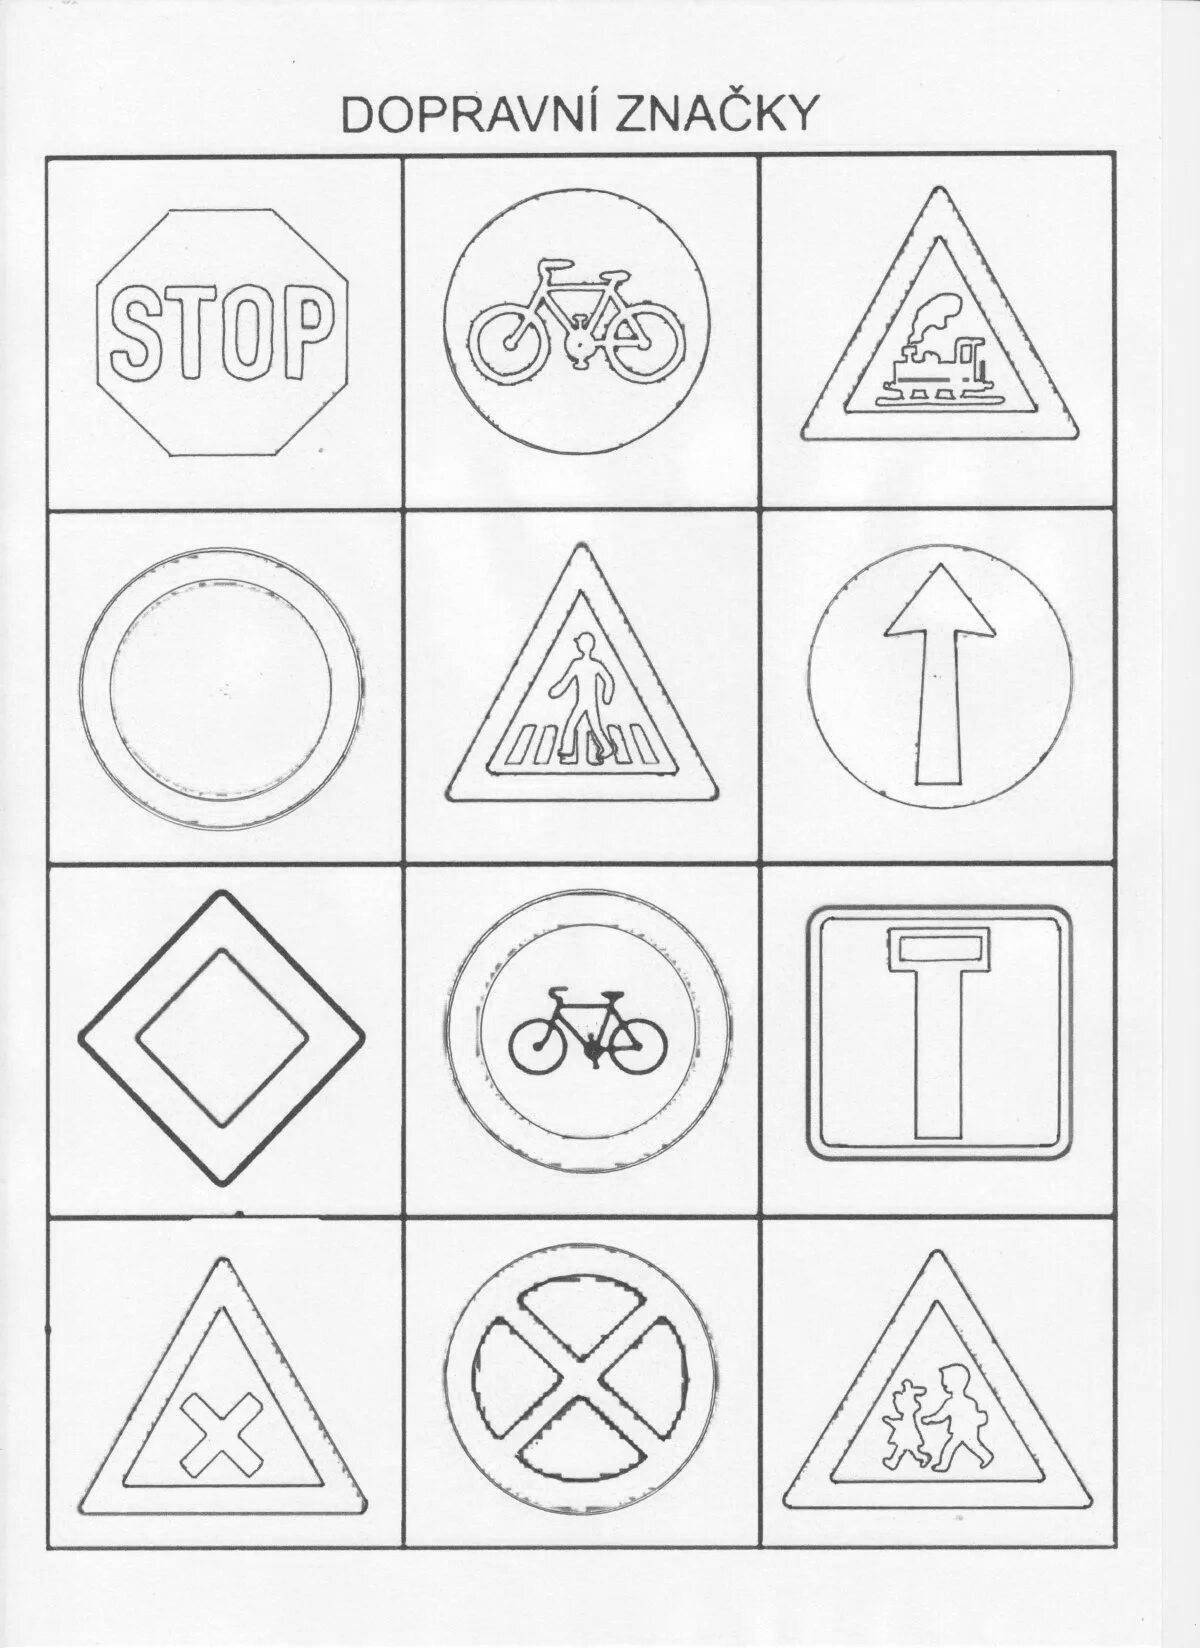 Coloring page cheerful road sign